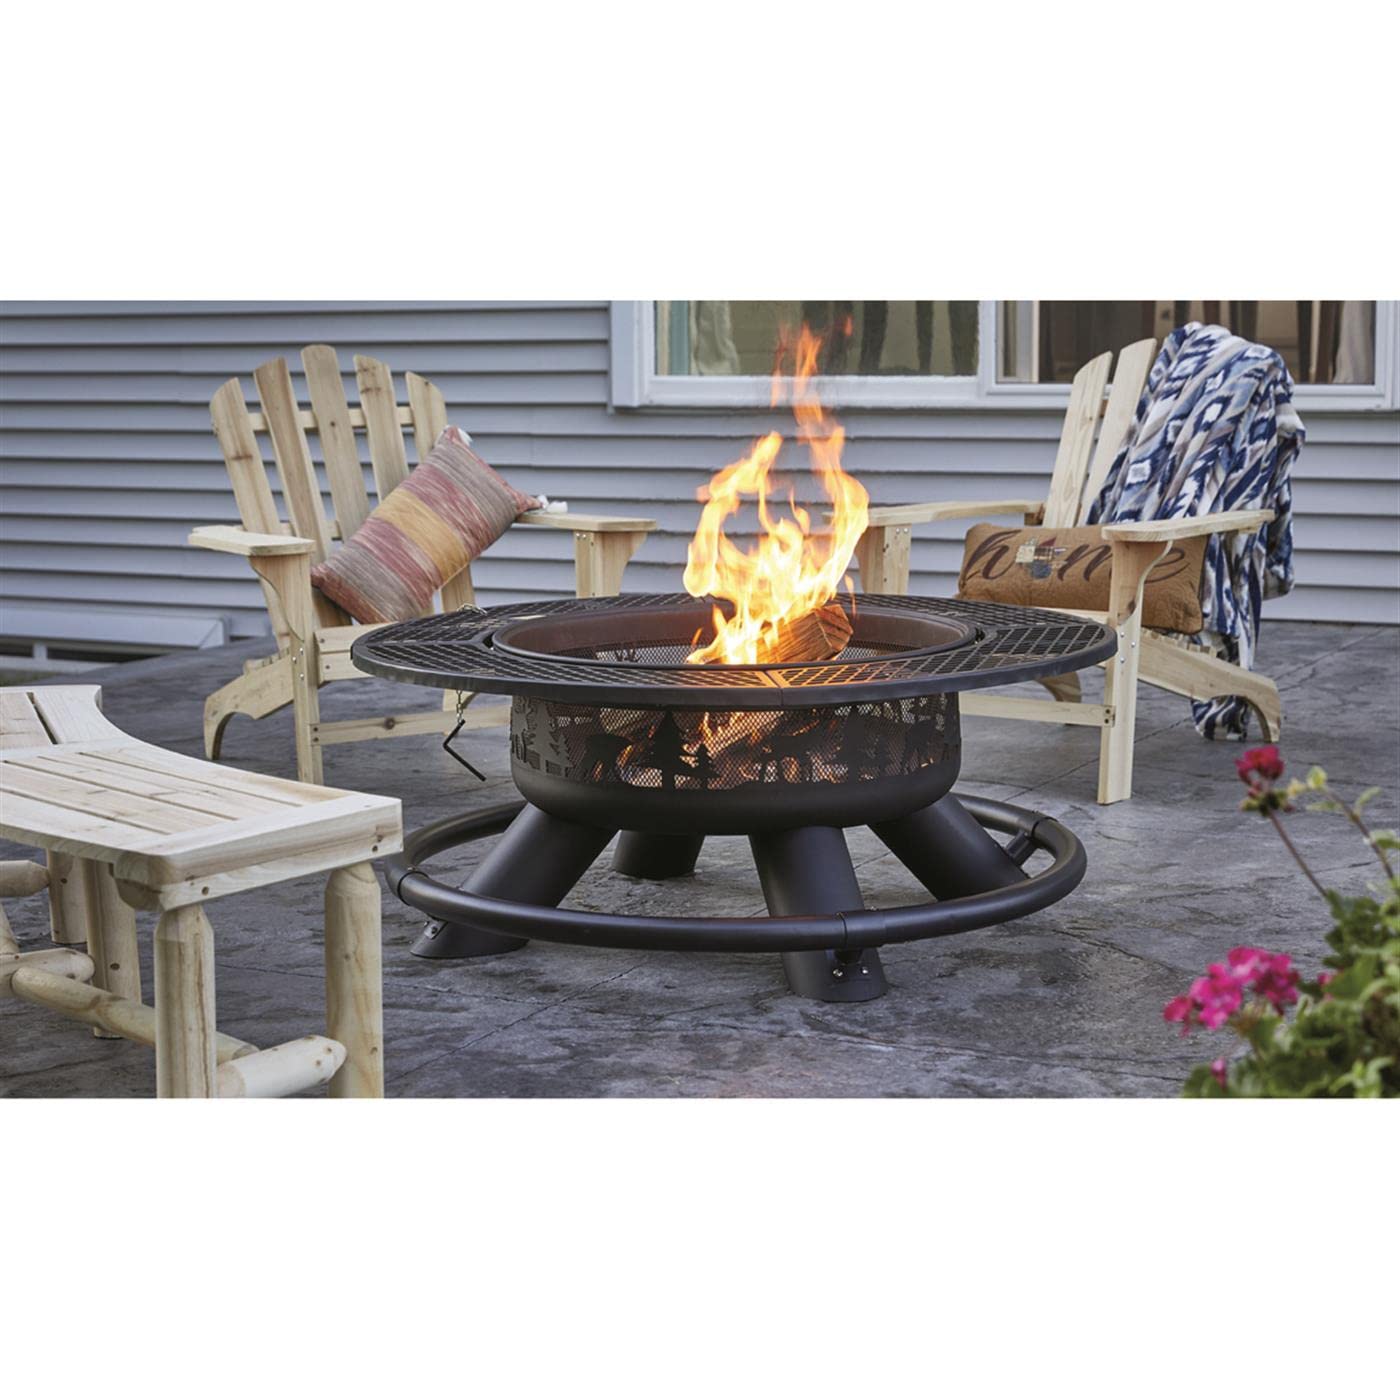 CASTLECREEK 47" Fire Pit BBQ Grill Outdoor Wood Burning Steel Log Firepit for Camping, Grilling, Smores, Yard, Cooking Outside, Barbecue, Bonfire, Wilderness